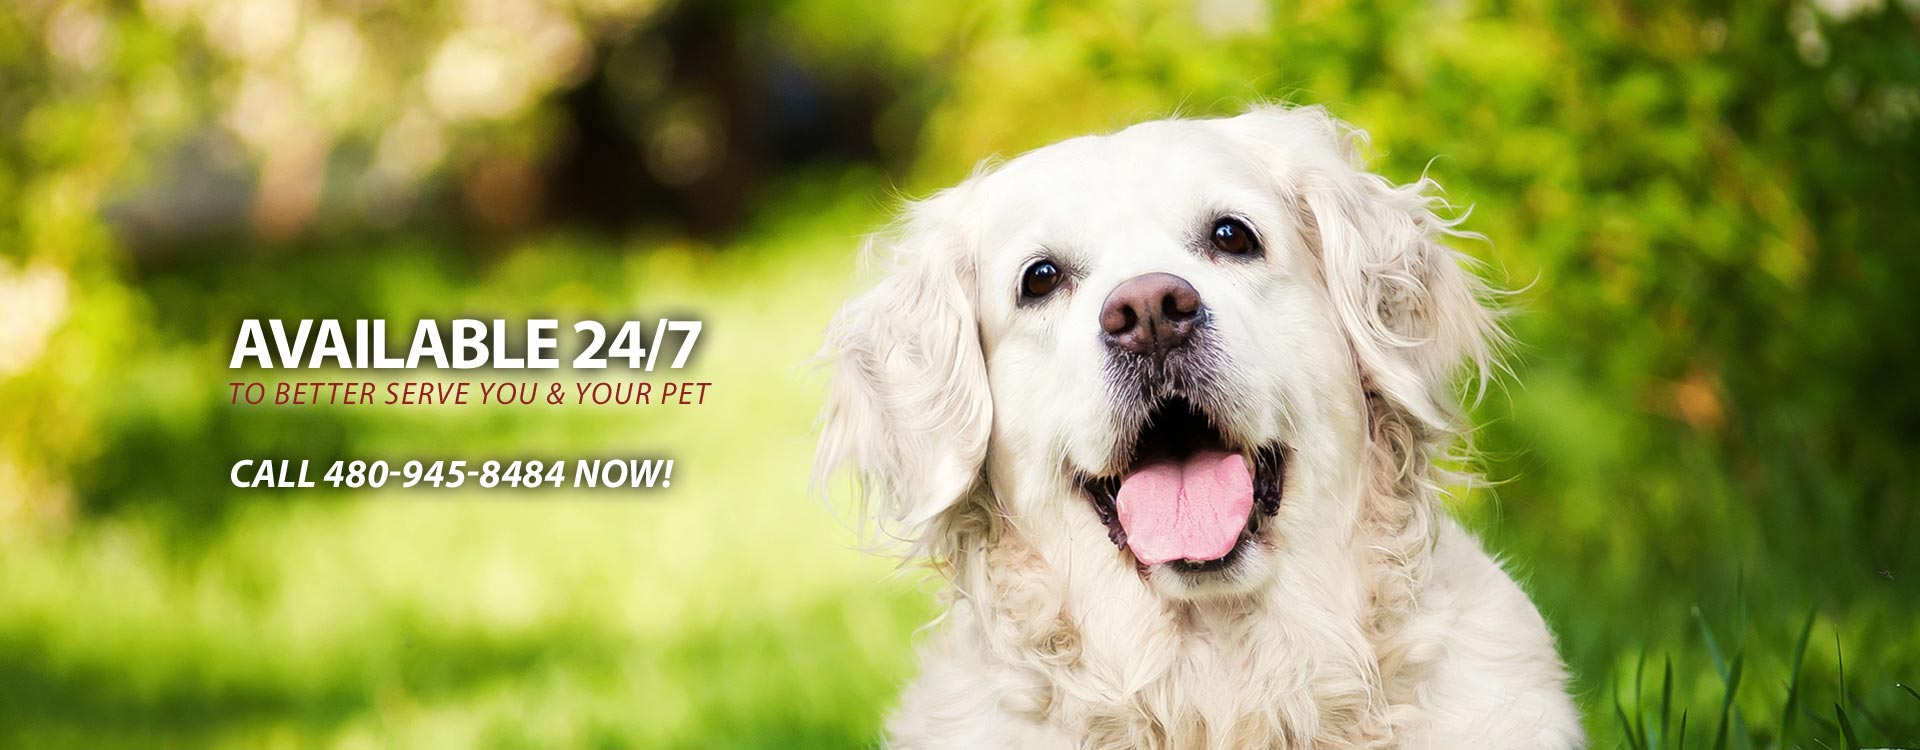 24 Hour Paradise Valley Veterinary Service